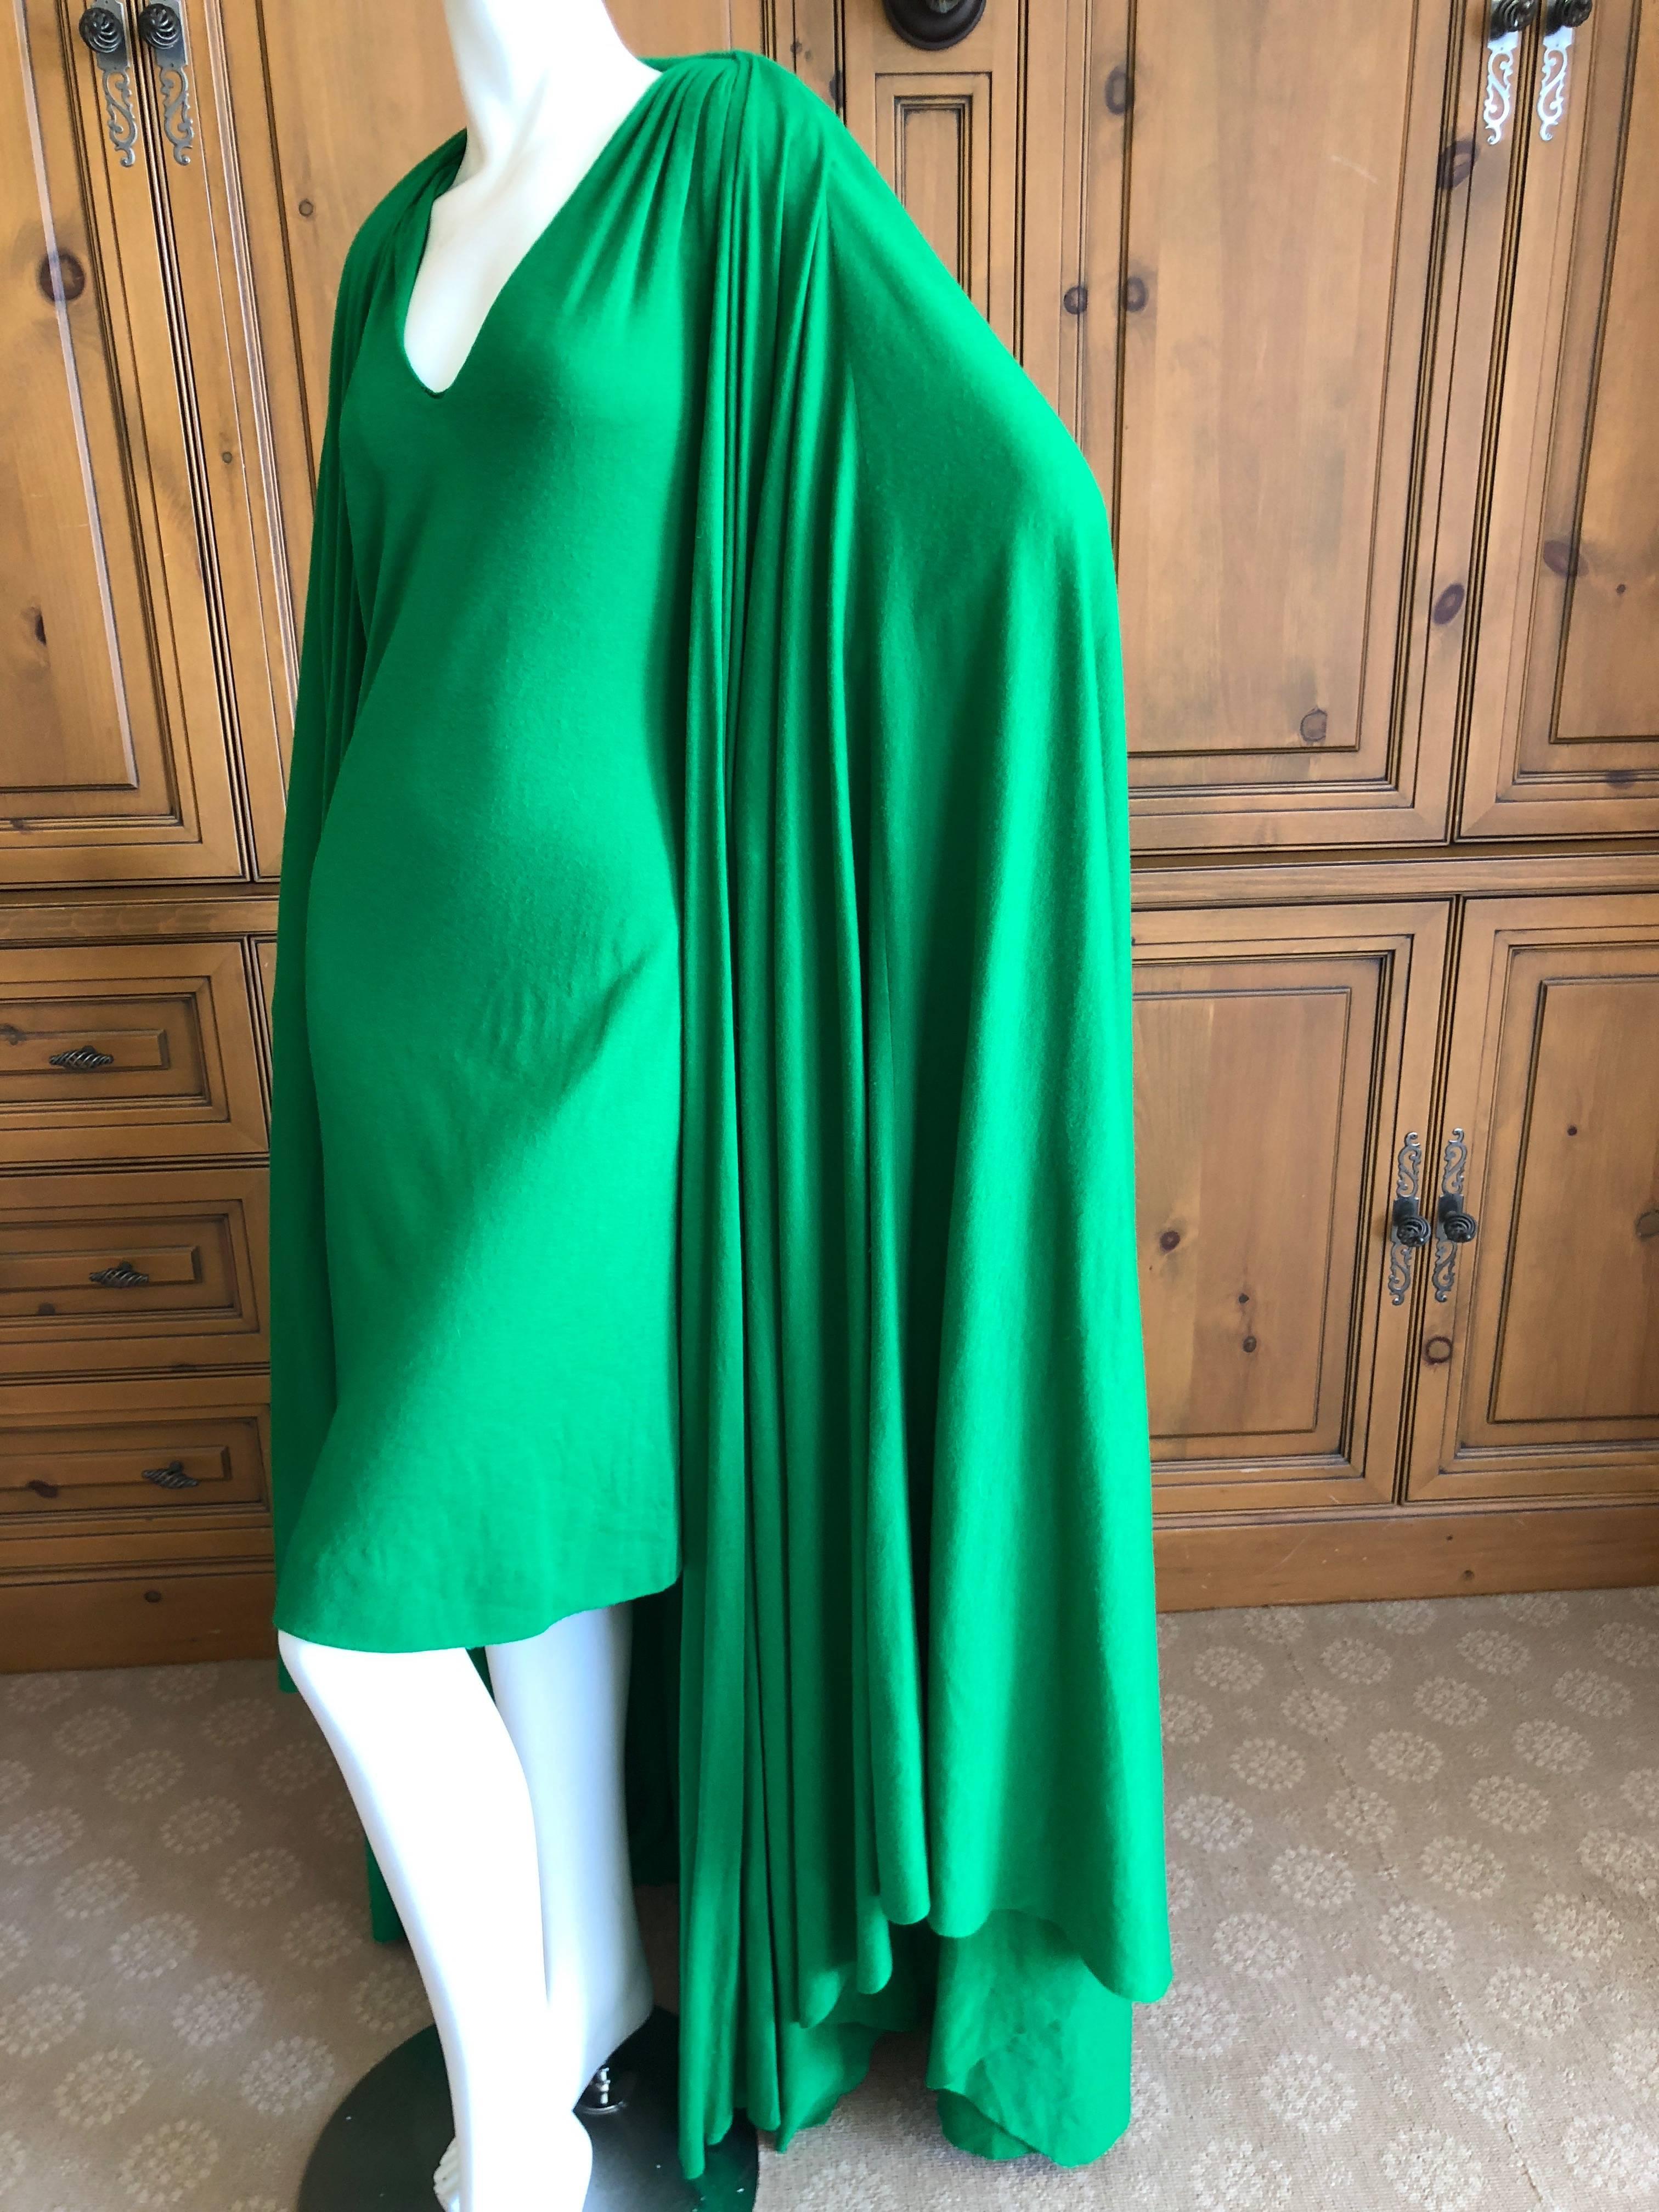 Cardinali Luxurious Lime Green Cashmere Dress and Matching Cape For Sale 2